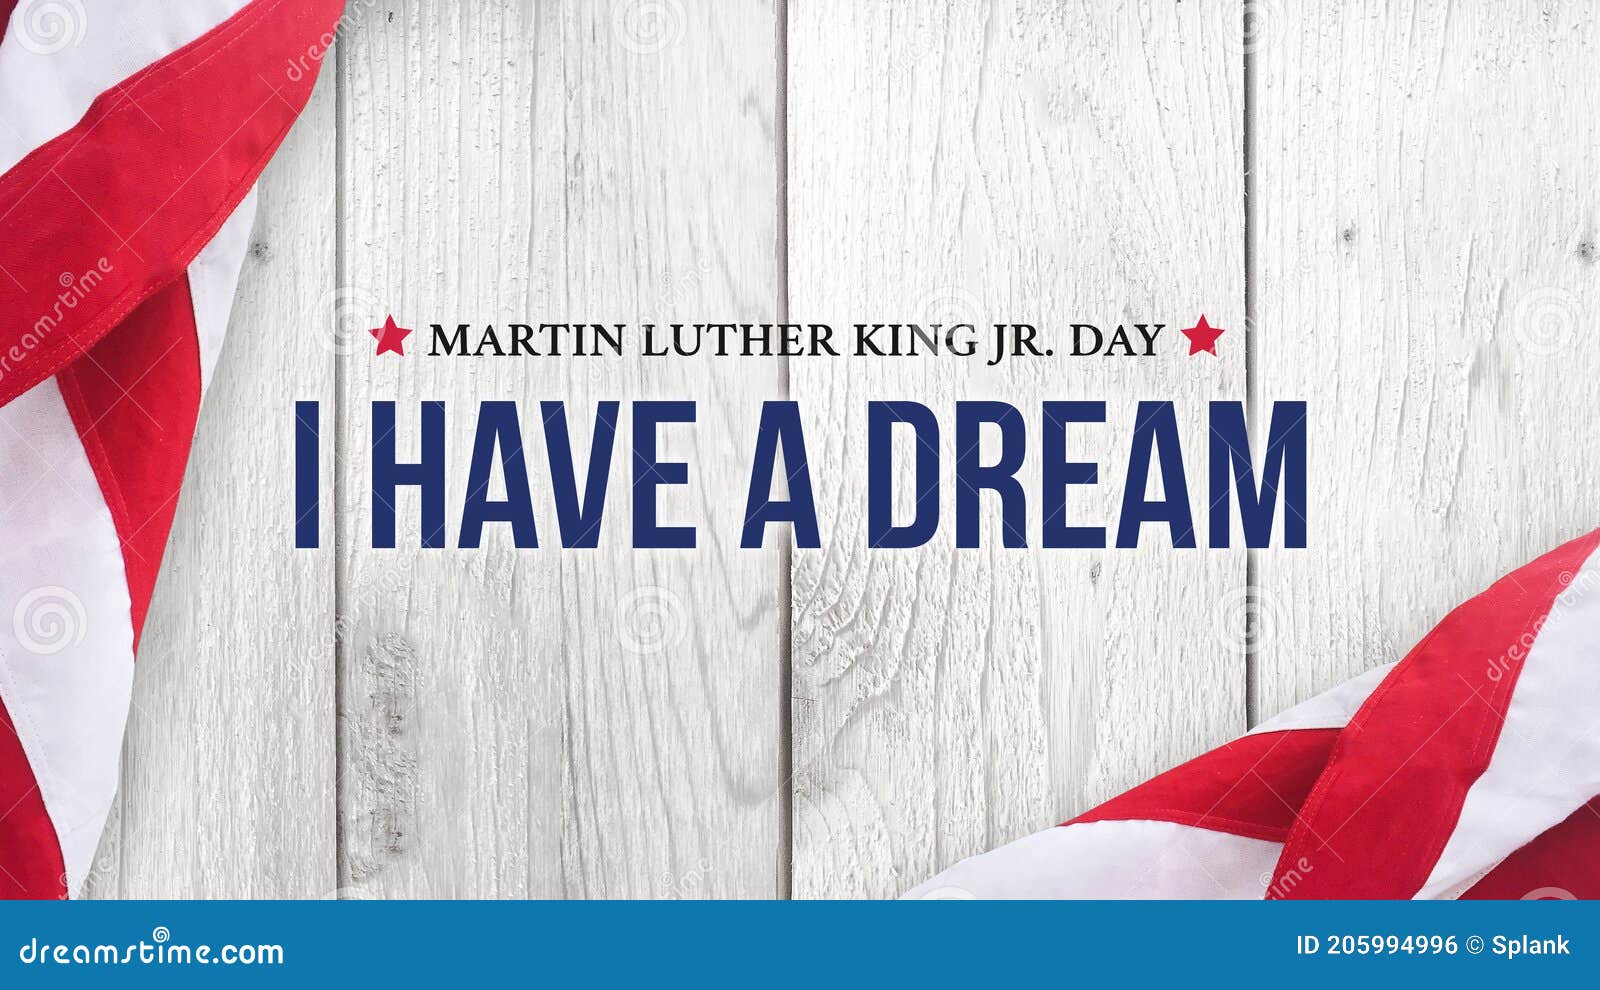 martin luther king jr. day i have a dream typography over white wood background